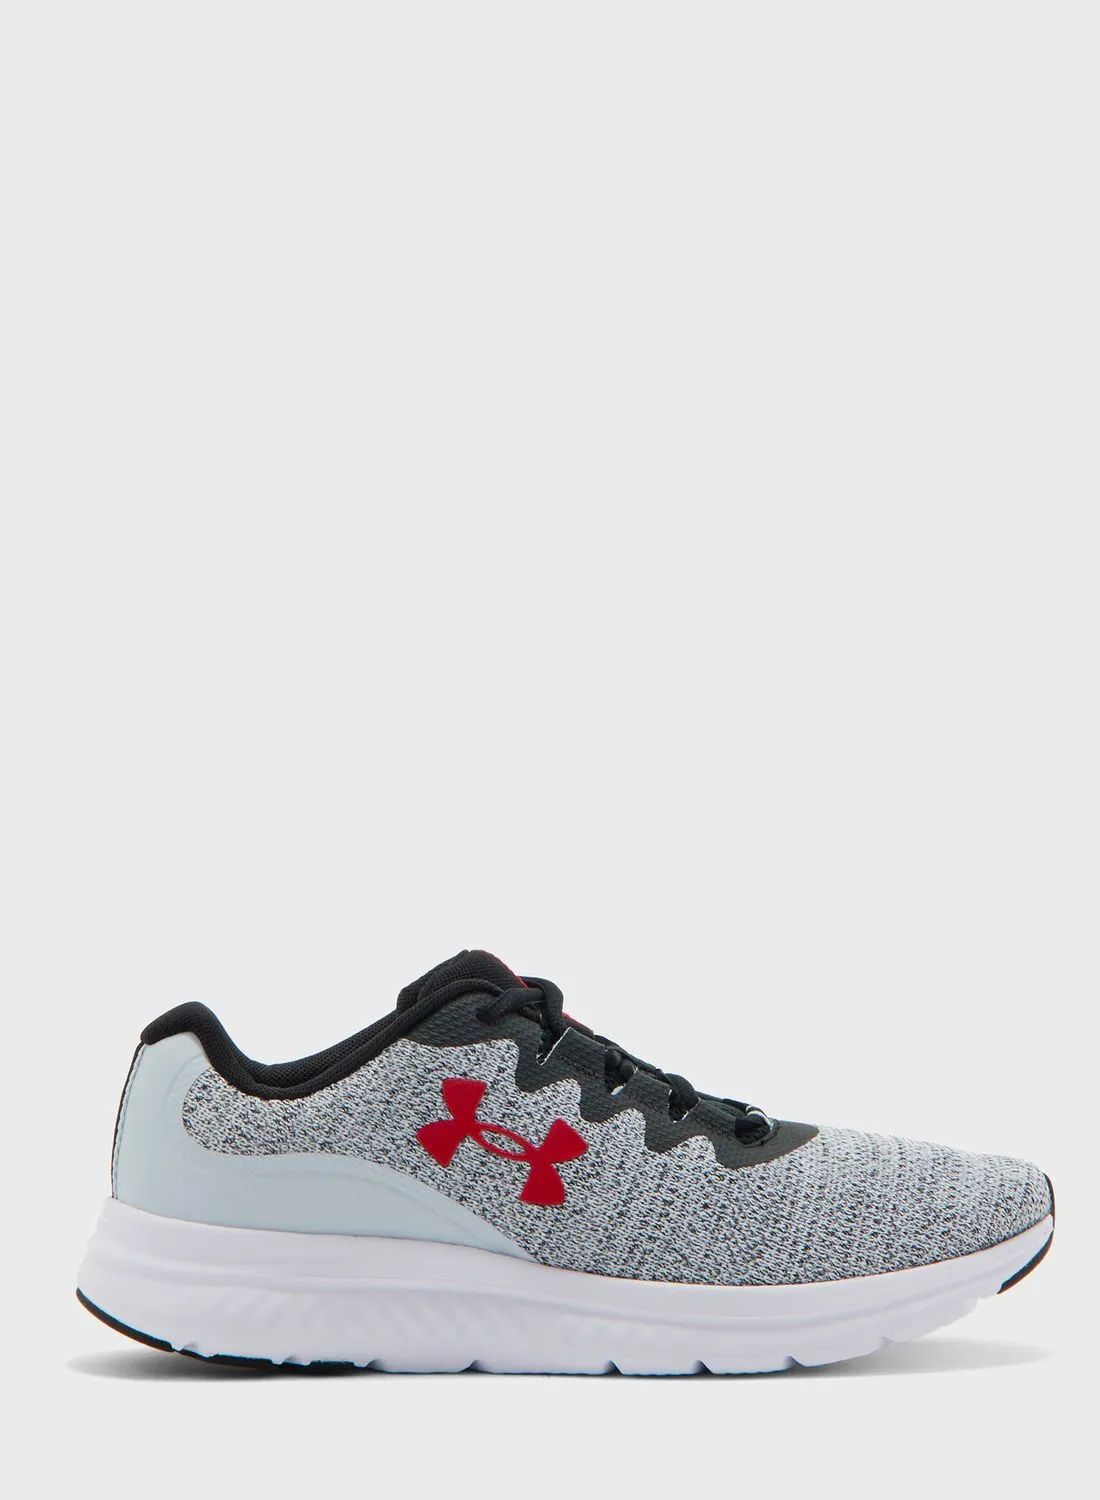 UNDER ARMOUR Charged Impulse 3 Knit